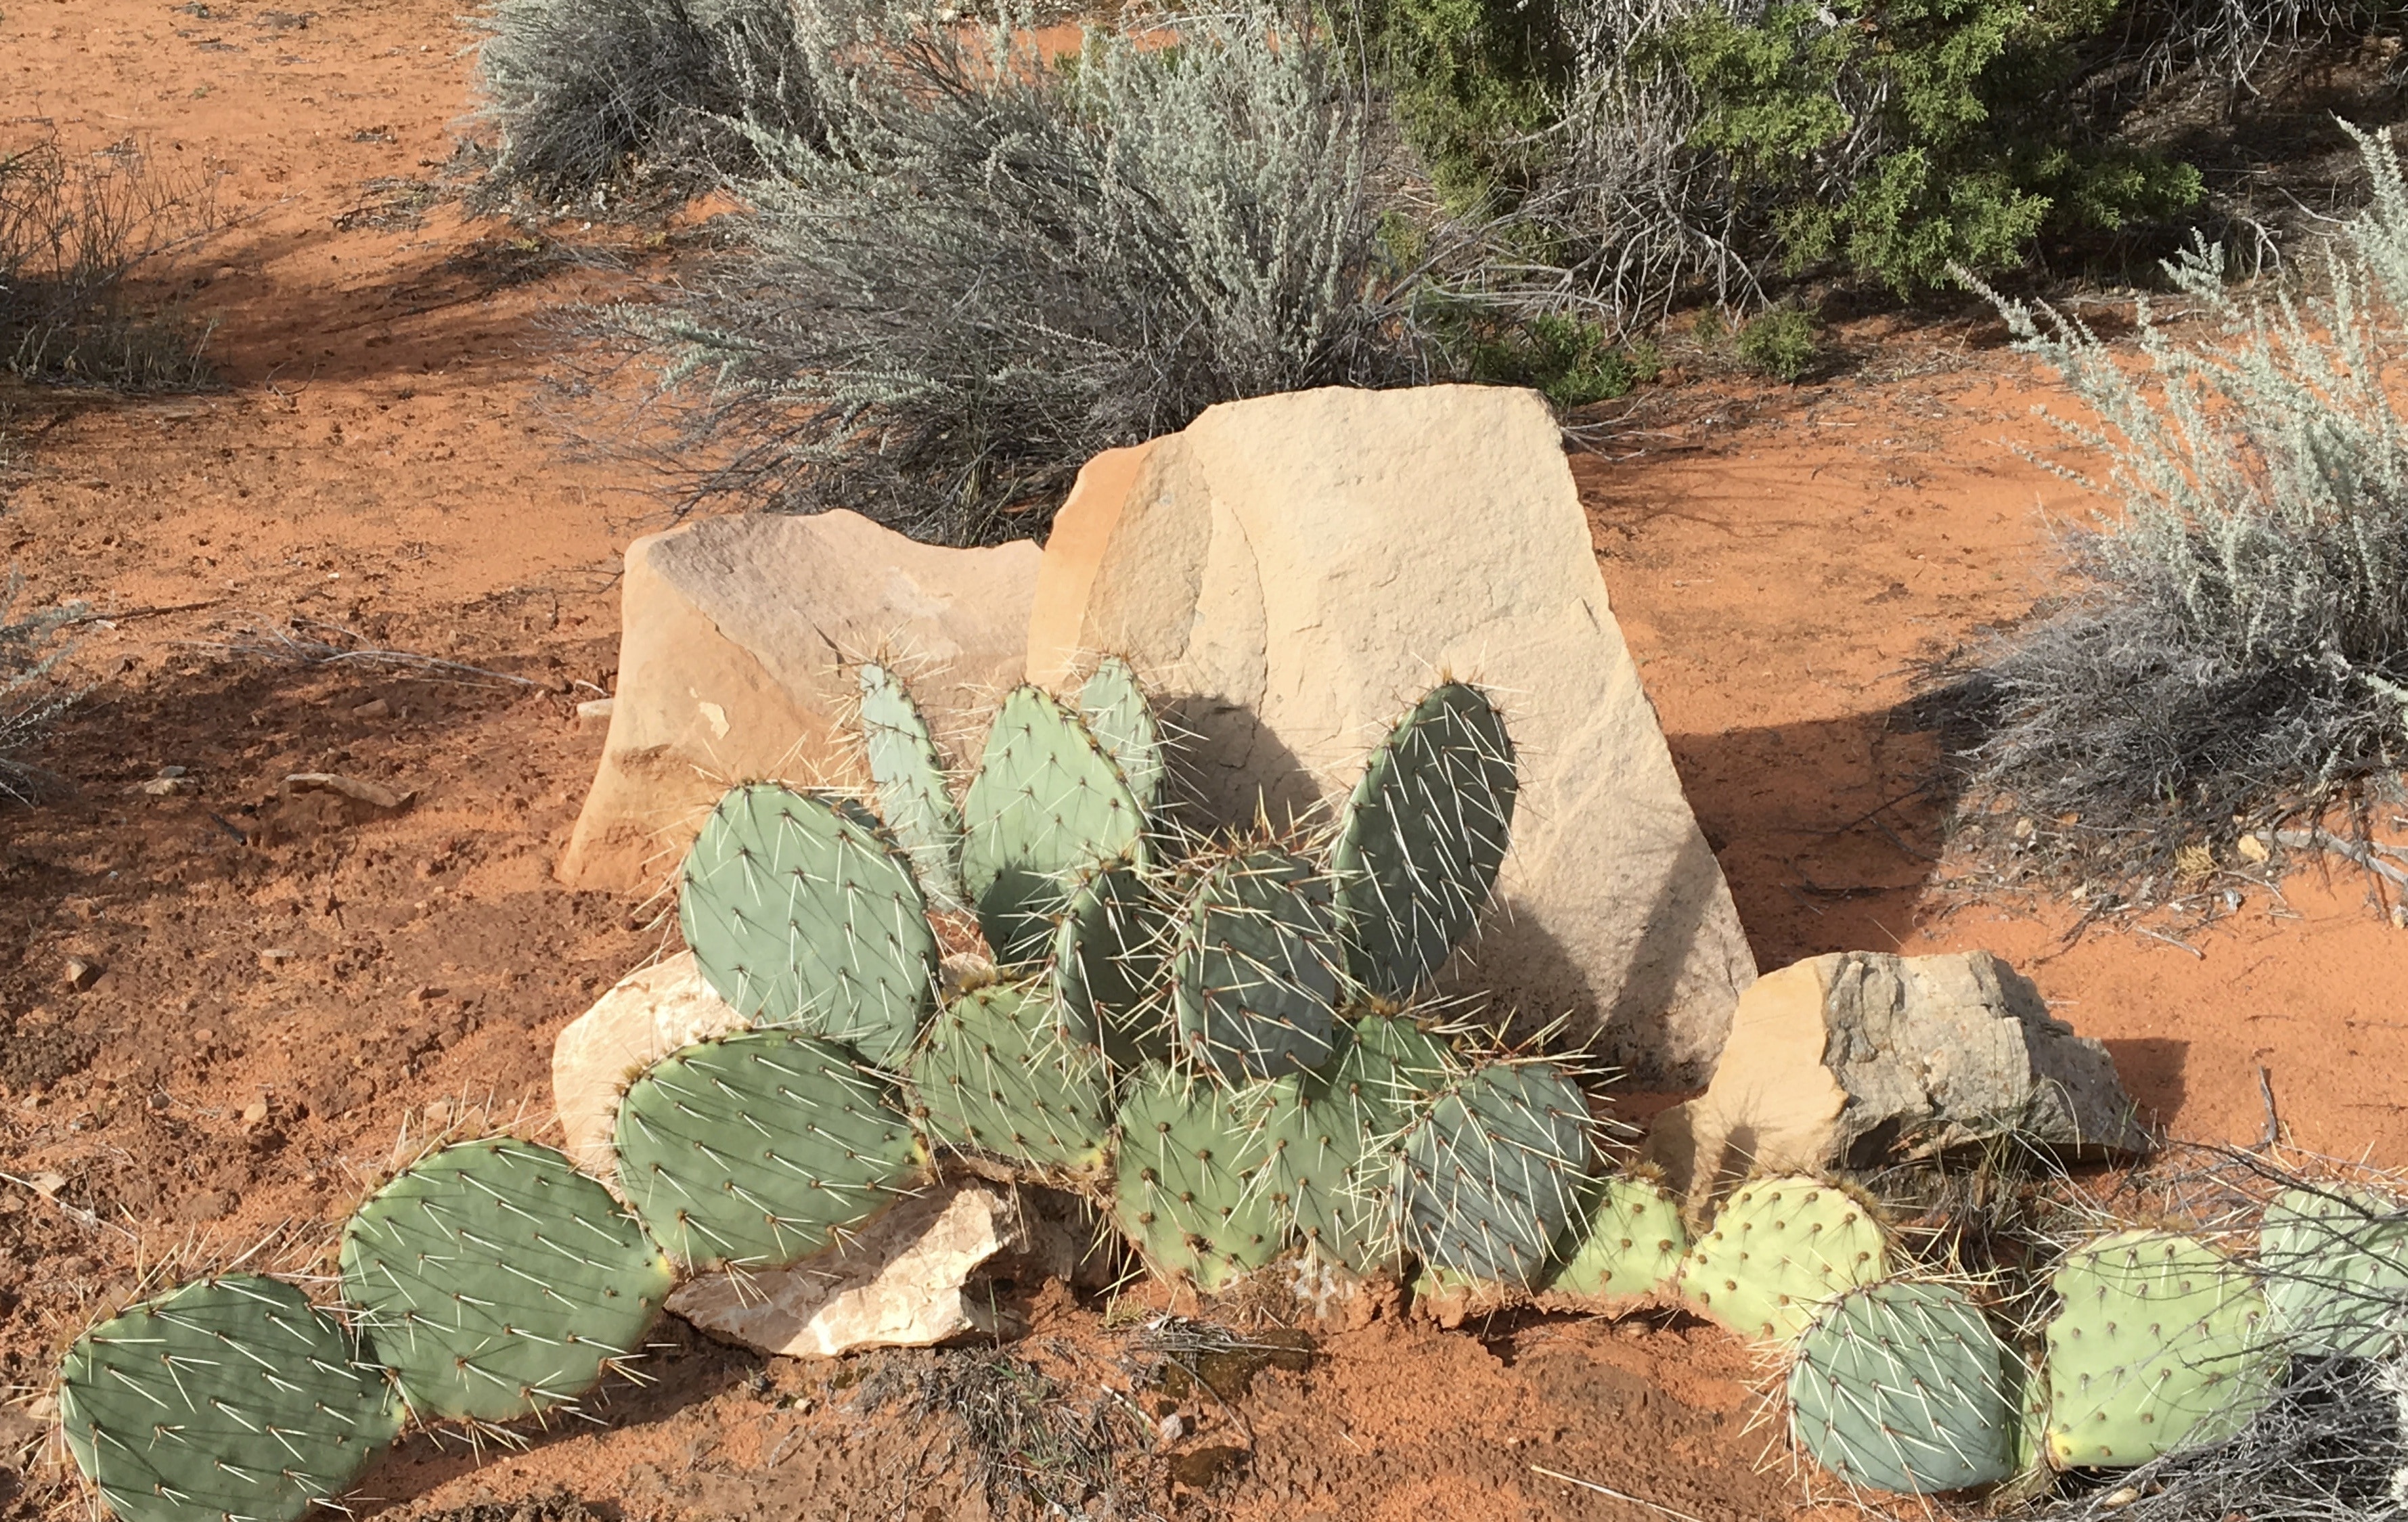 cactus plant and gray rock during daytimne